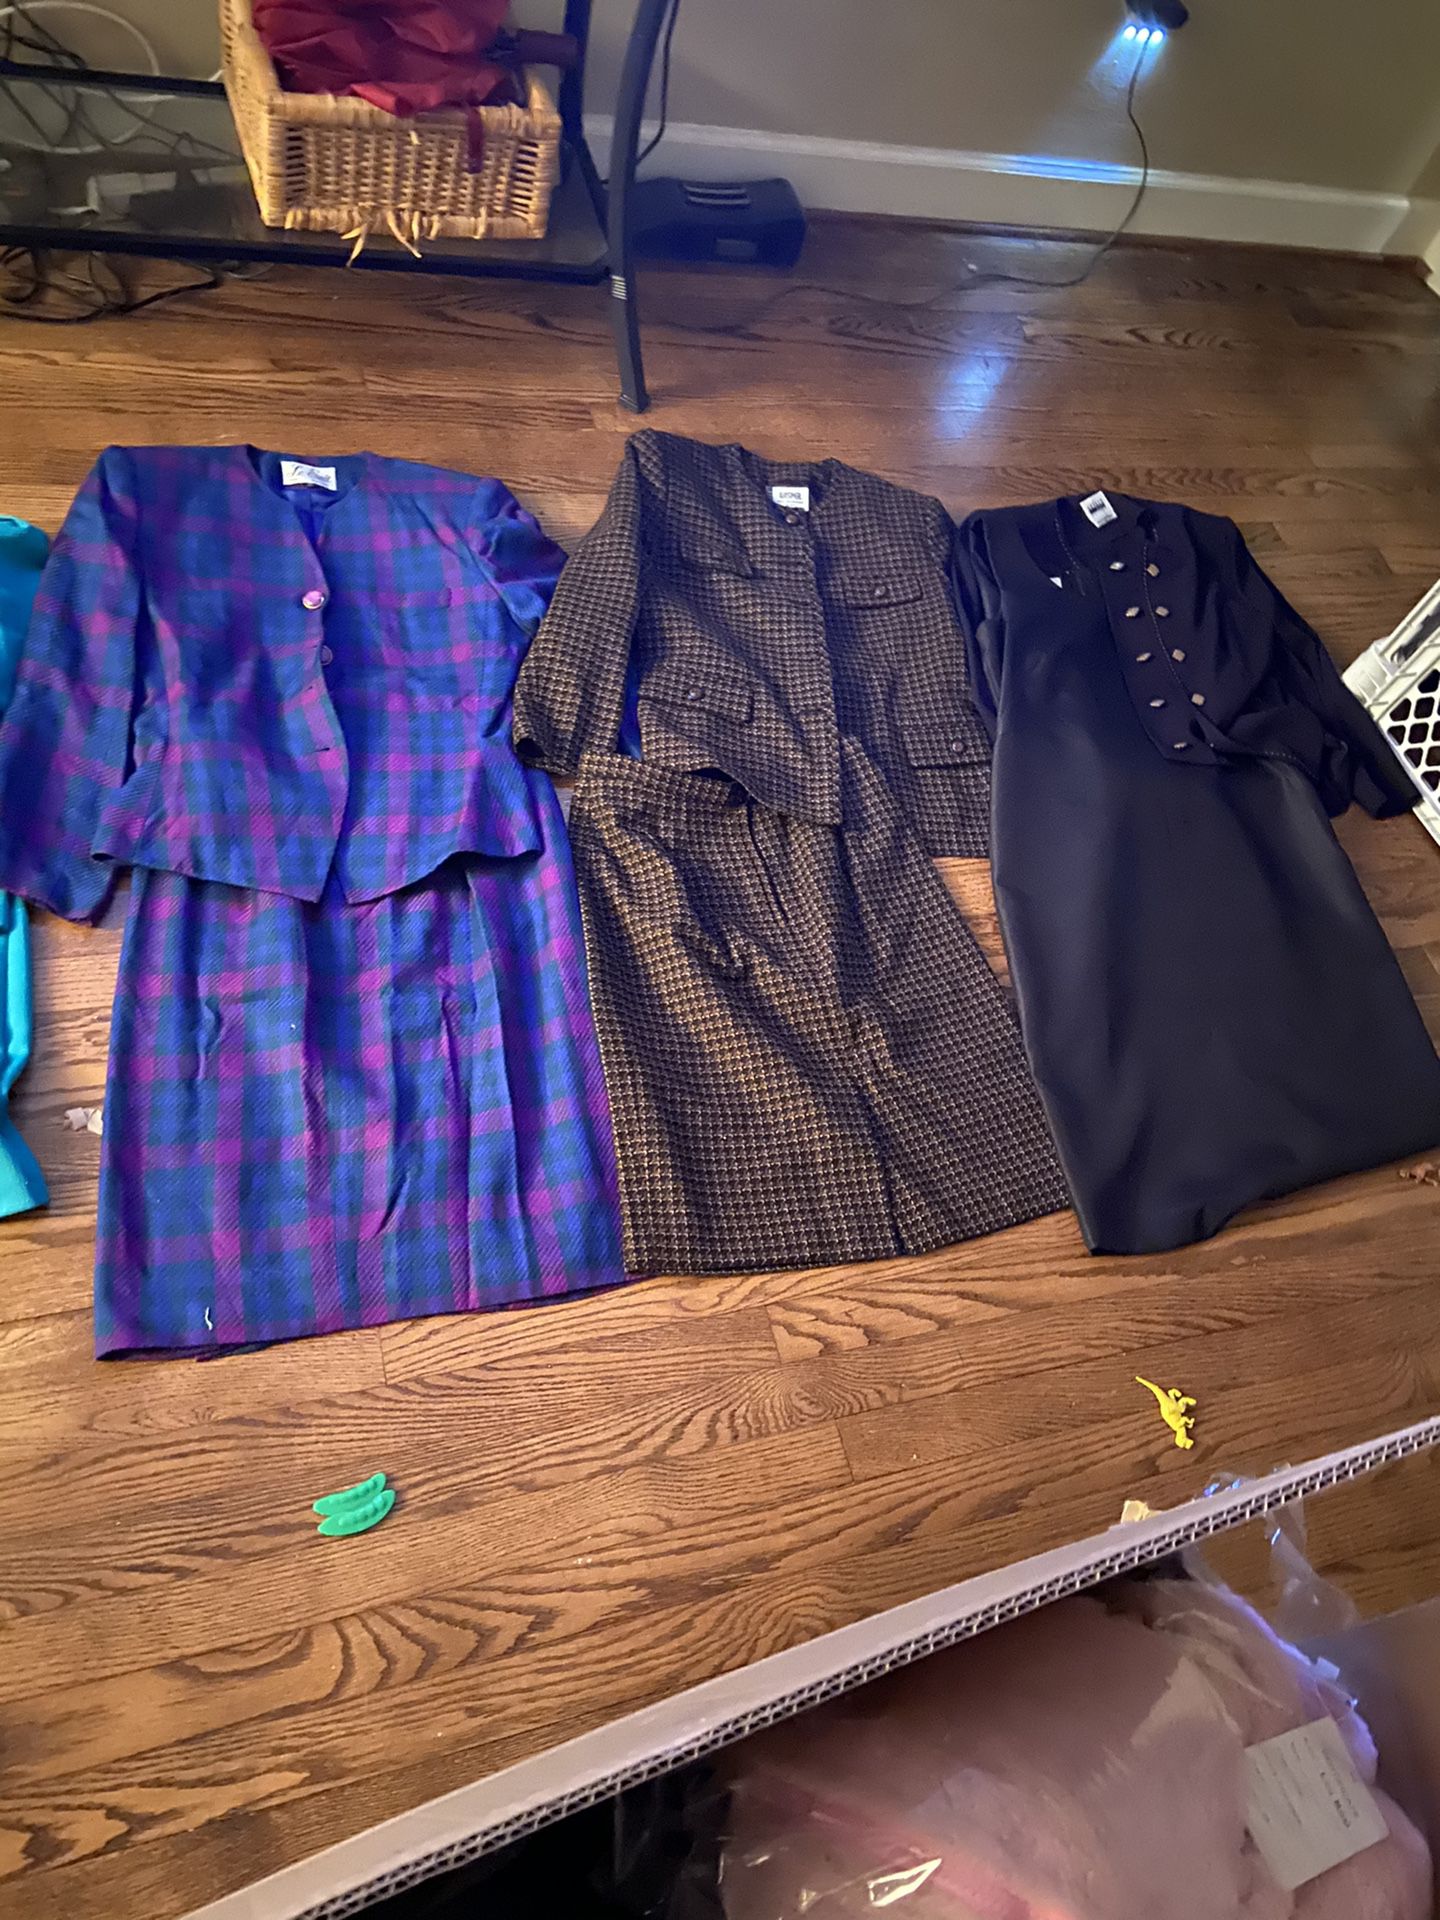 Variety of women’s work clothes size 12p